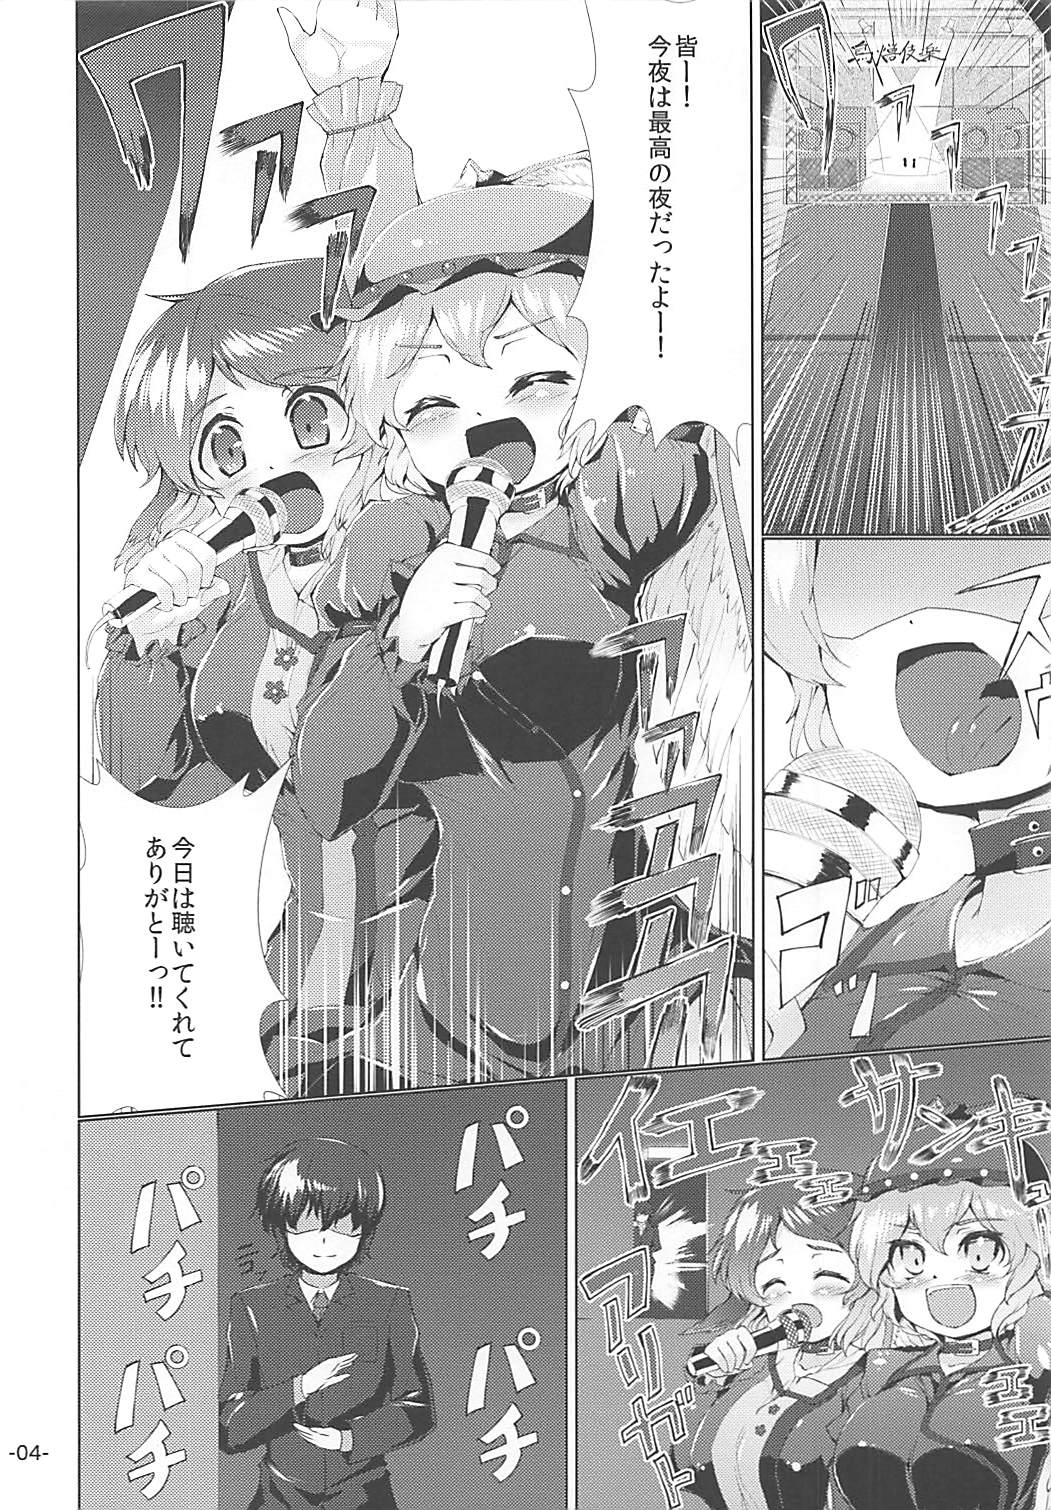 (C85) [ROCK CLIME (Danbo)] Choujuu All Night (Touhou Project) (C85) [ROCK CLIME (ダンボ)] チョウジュウオールナイト (東方Project)